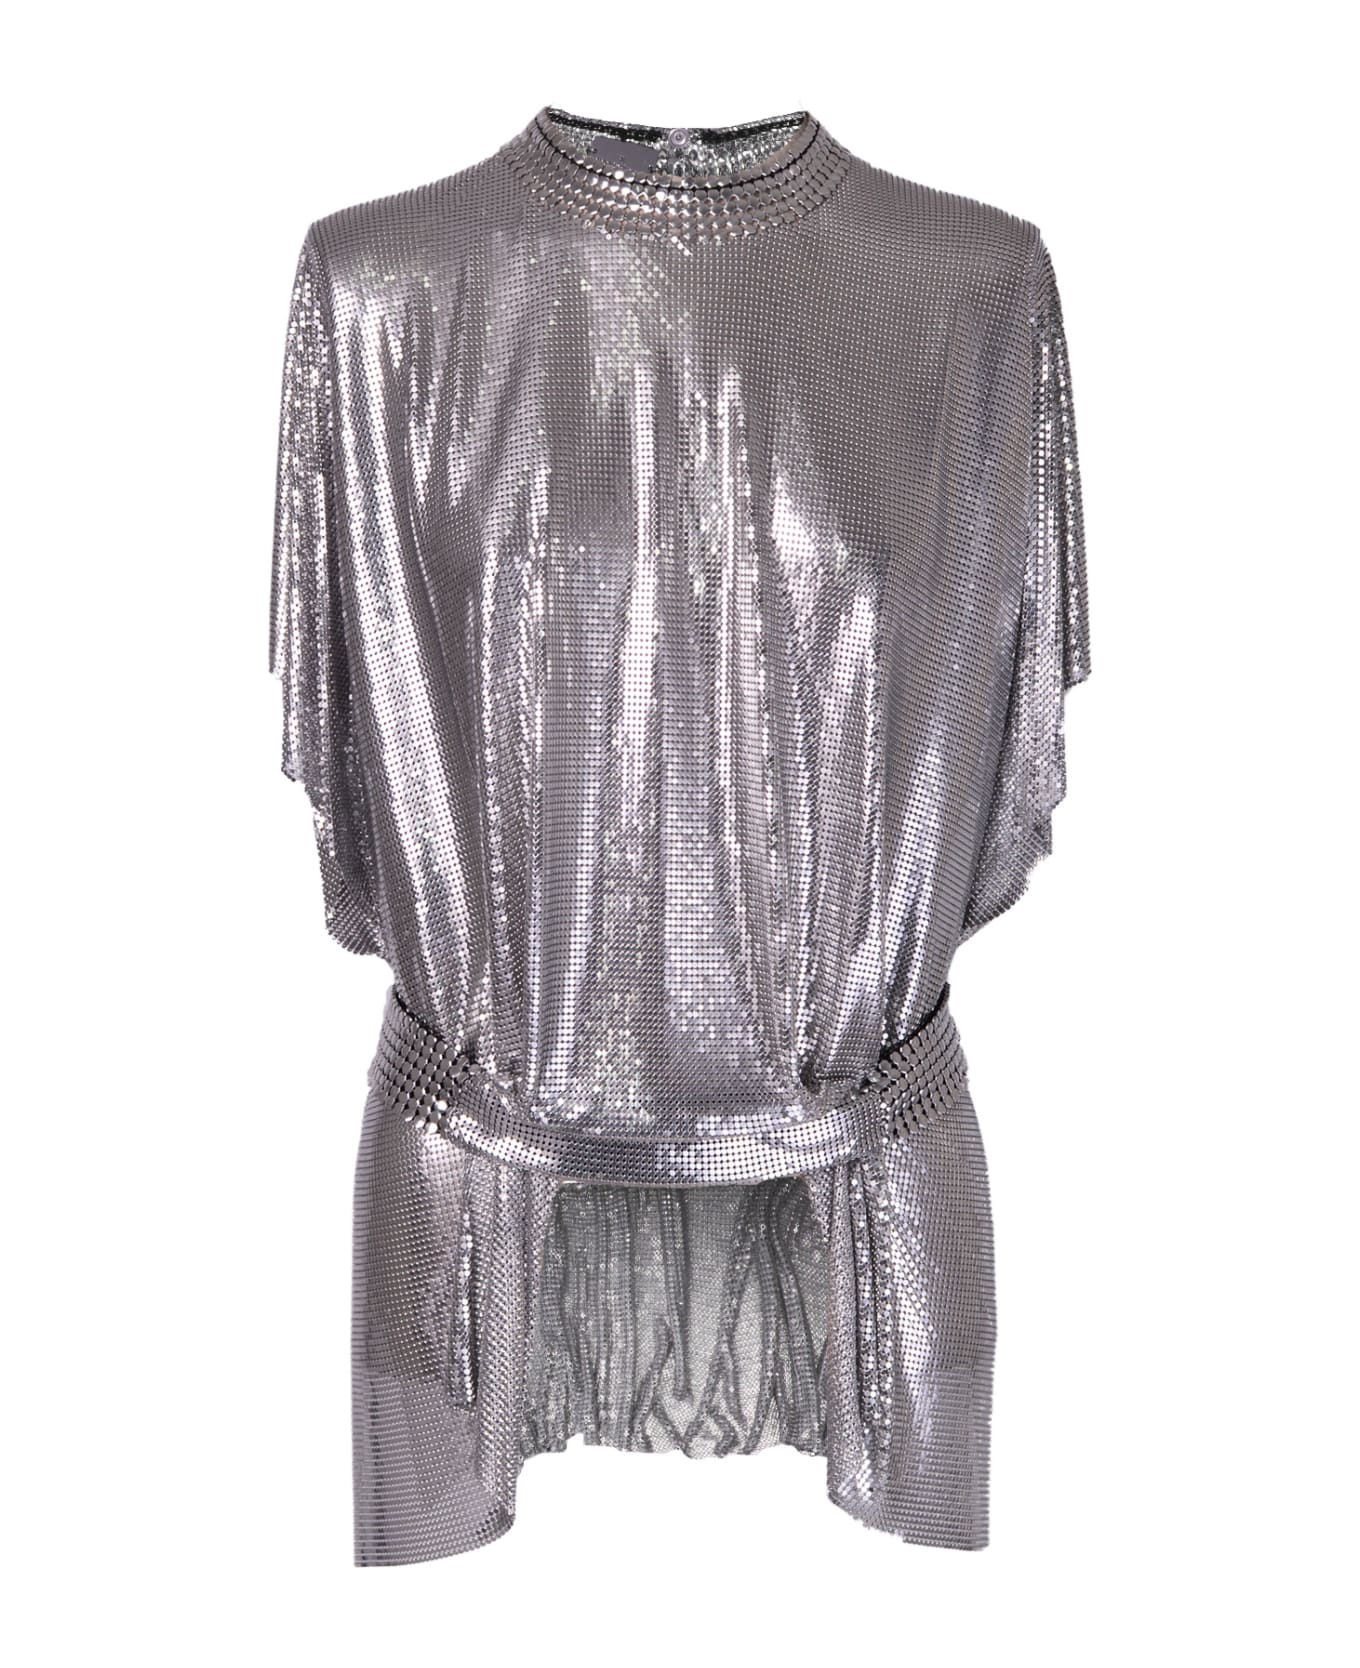 Paco Rabanne Top - Silver